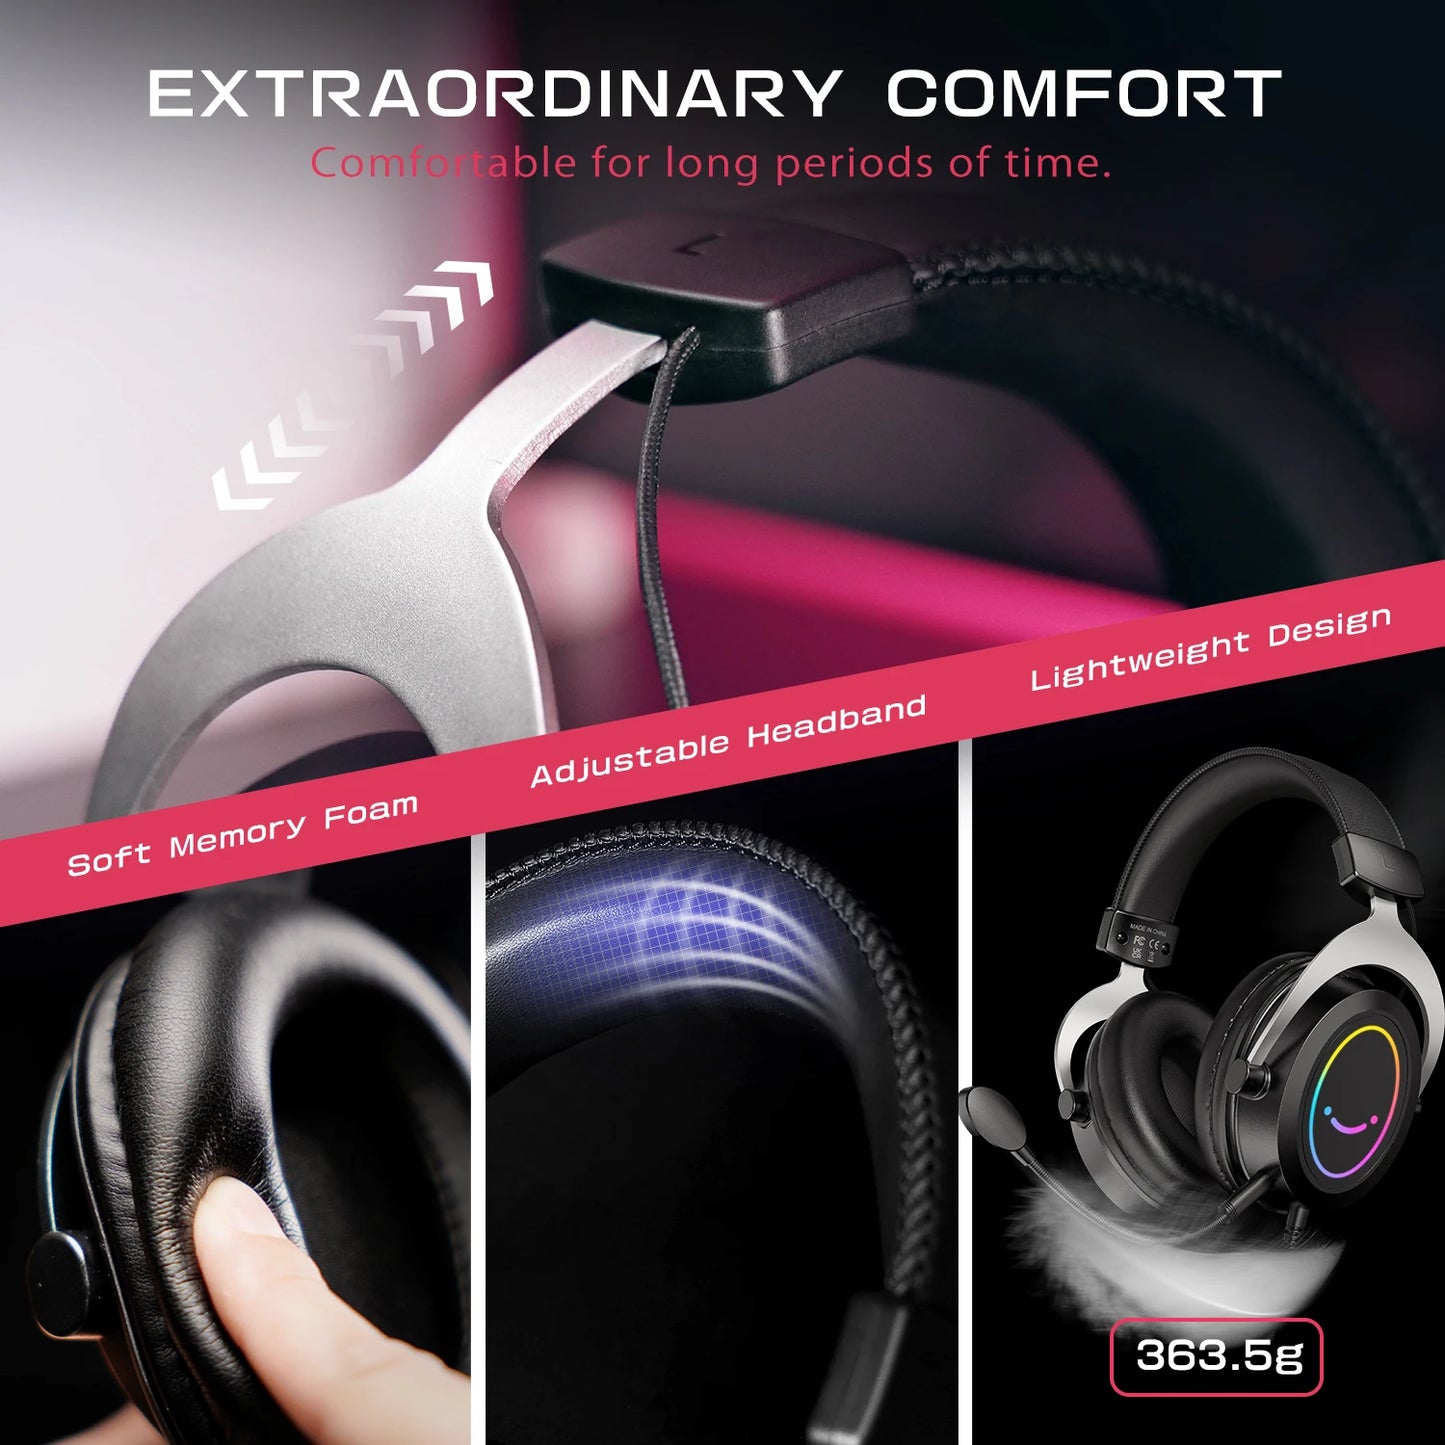 FIFINE Gaming Headset with Stereo Sound/Detachable MIC/RGB/Line Control,Over-Ear Headphone for PC PS4 PS5 Xbox -AMPLIGAME H3